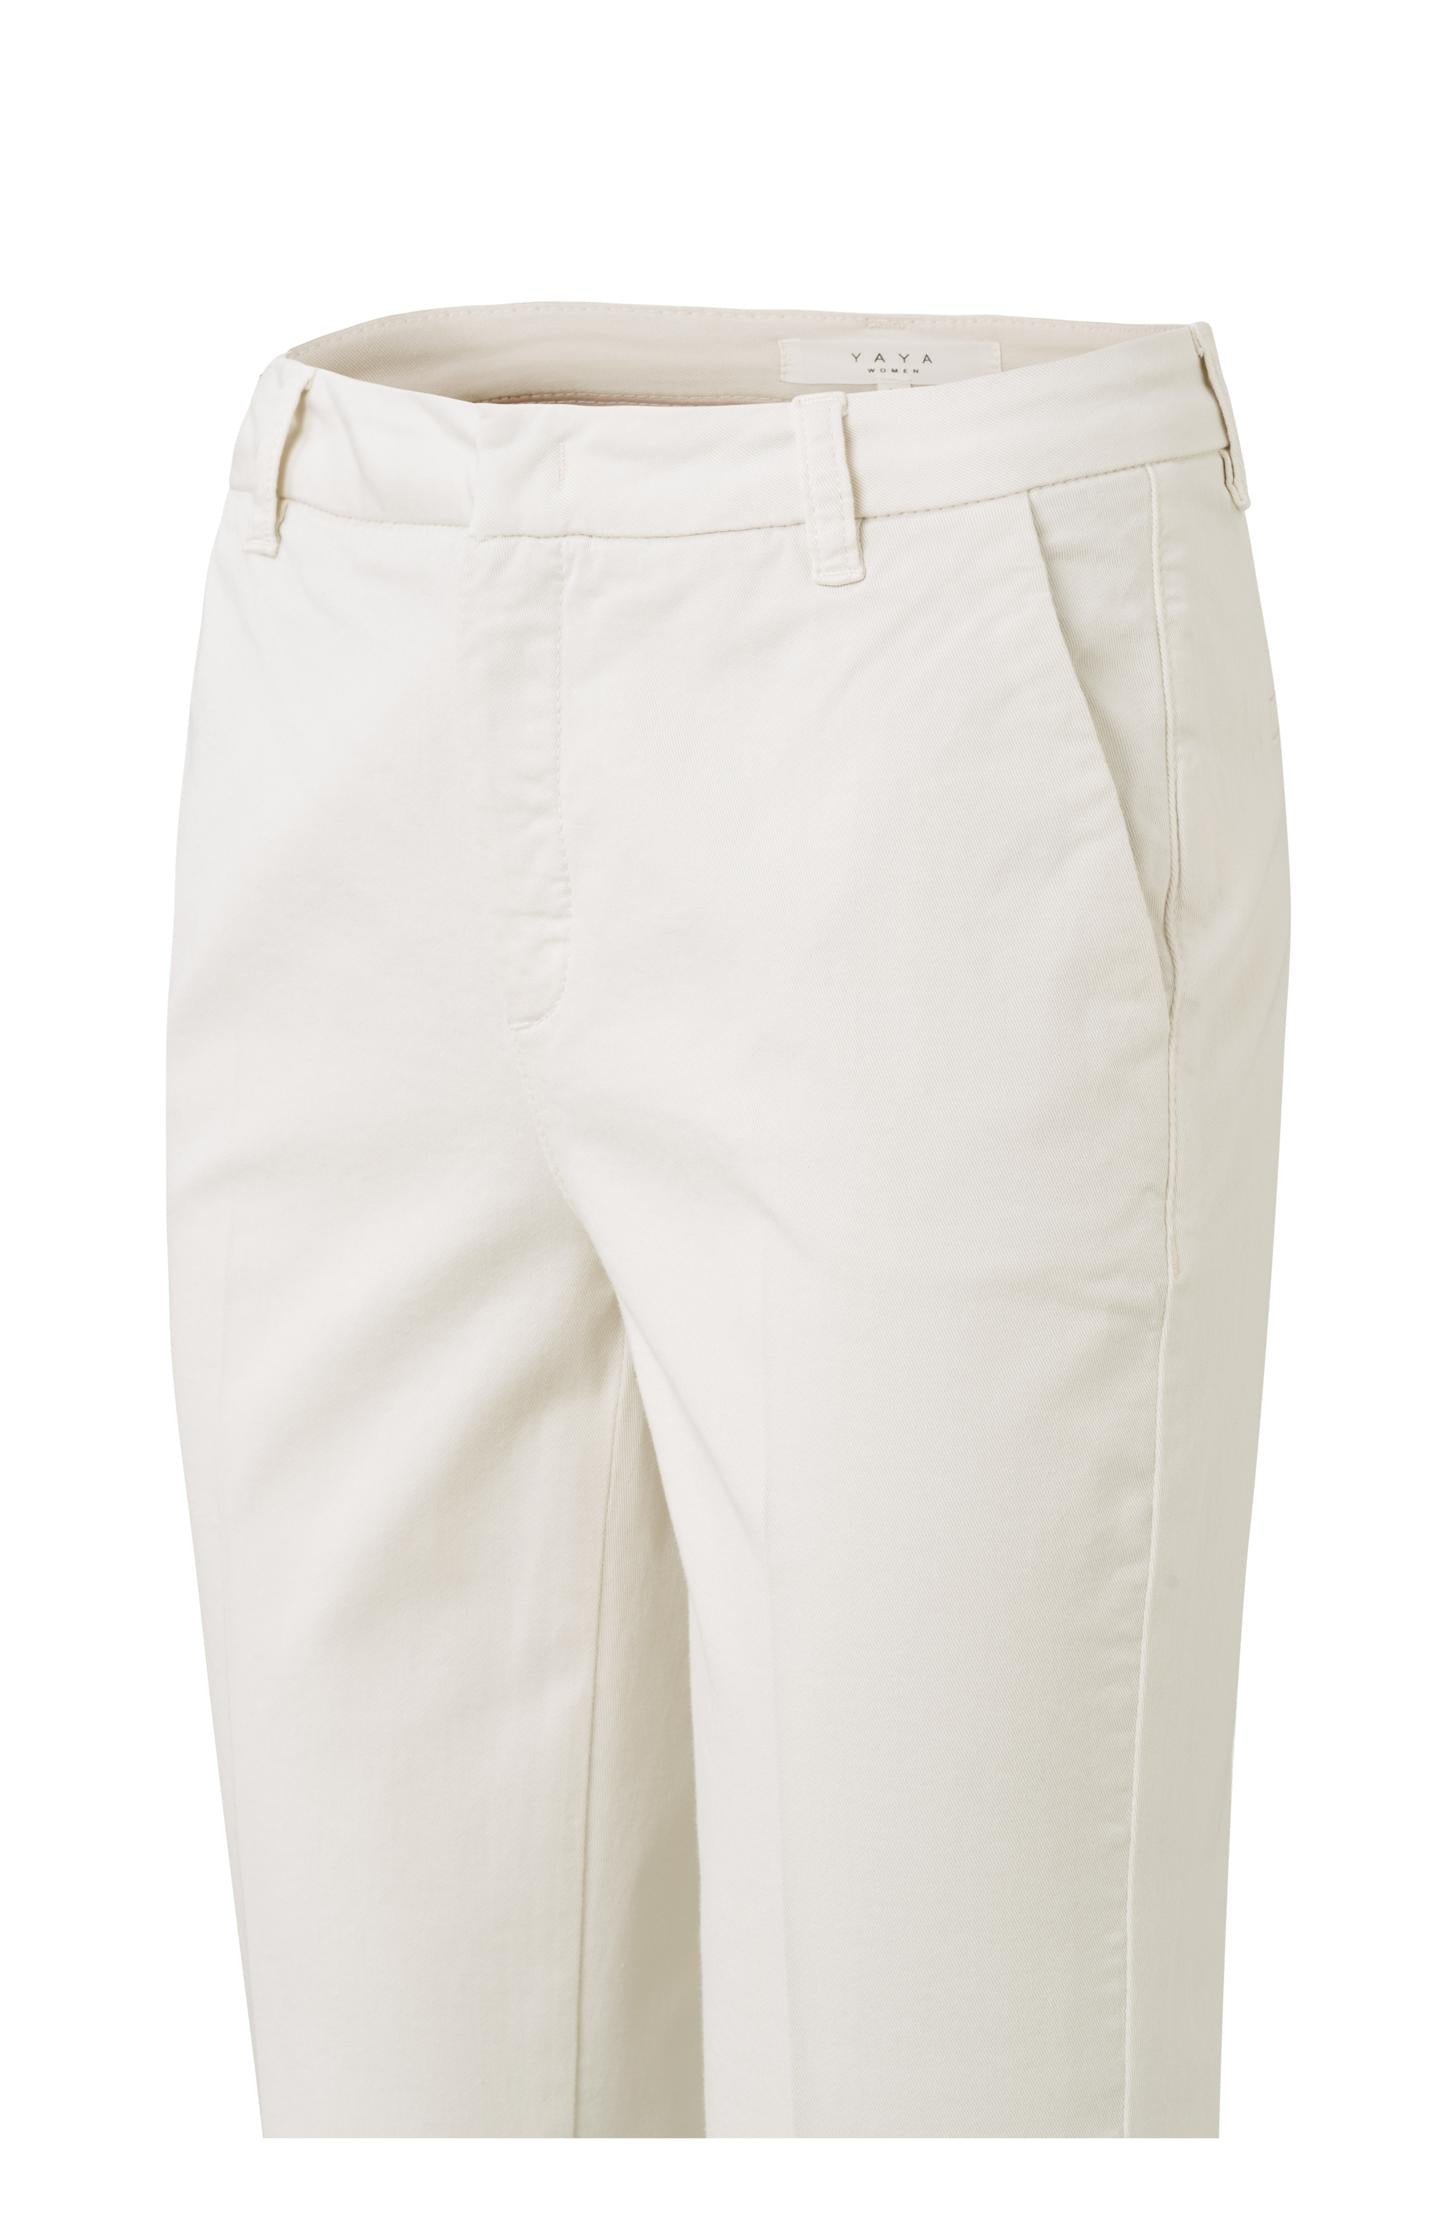 Basic chino with side pockets and a zipper in a close fit